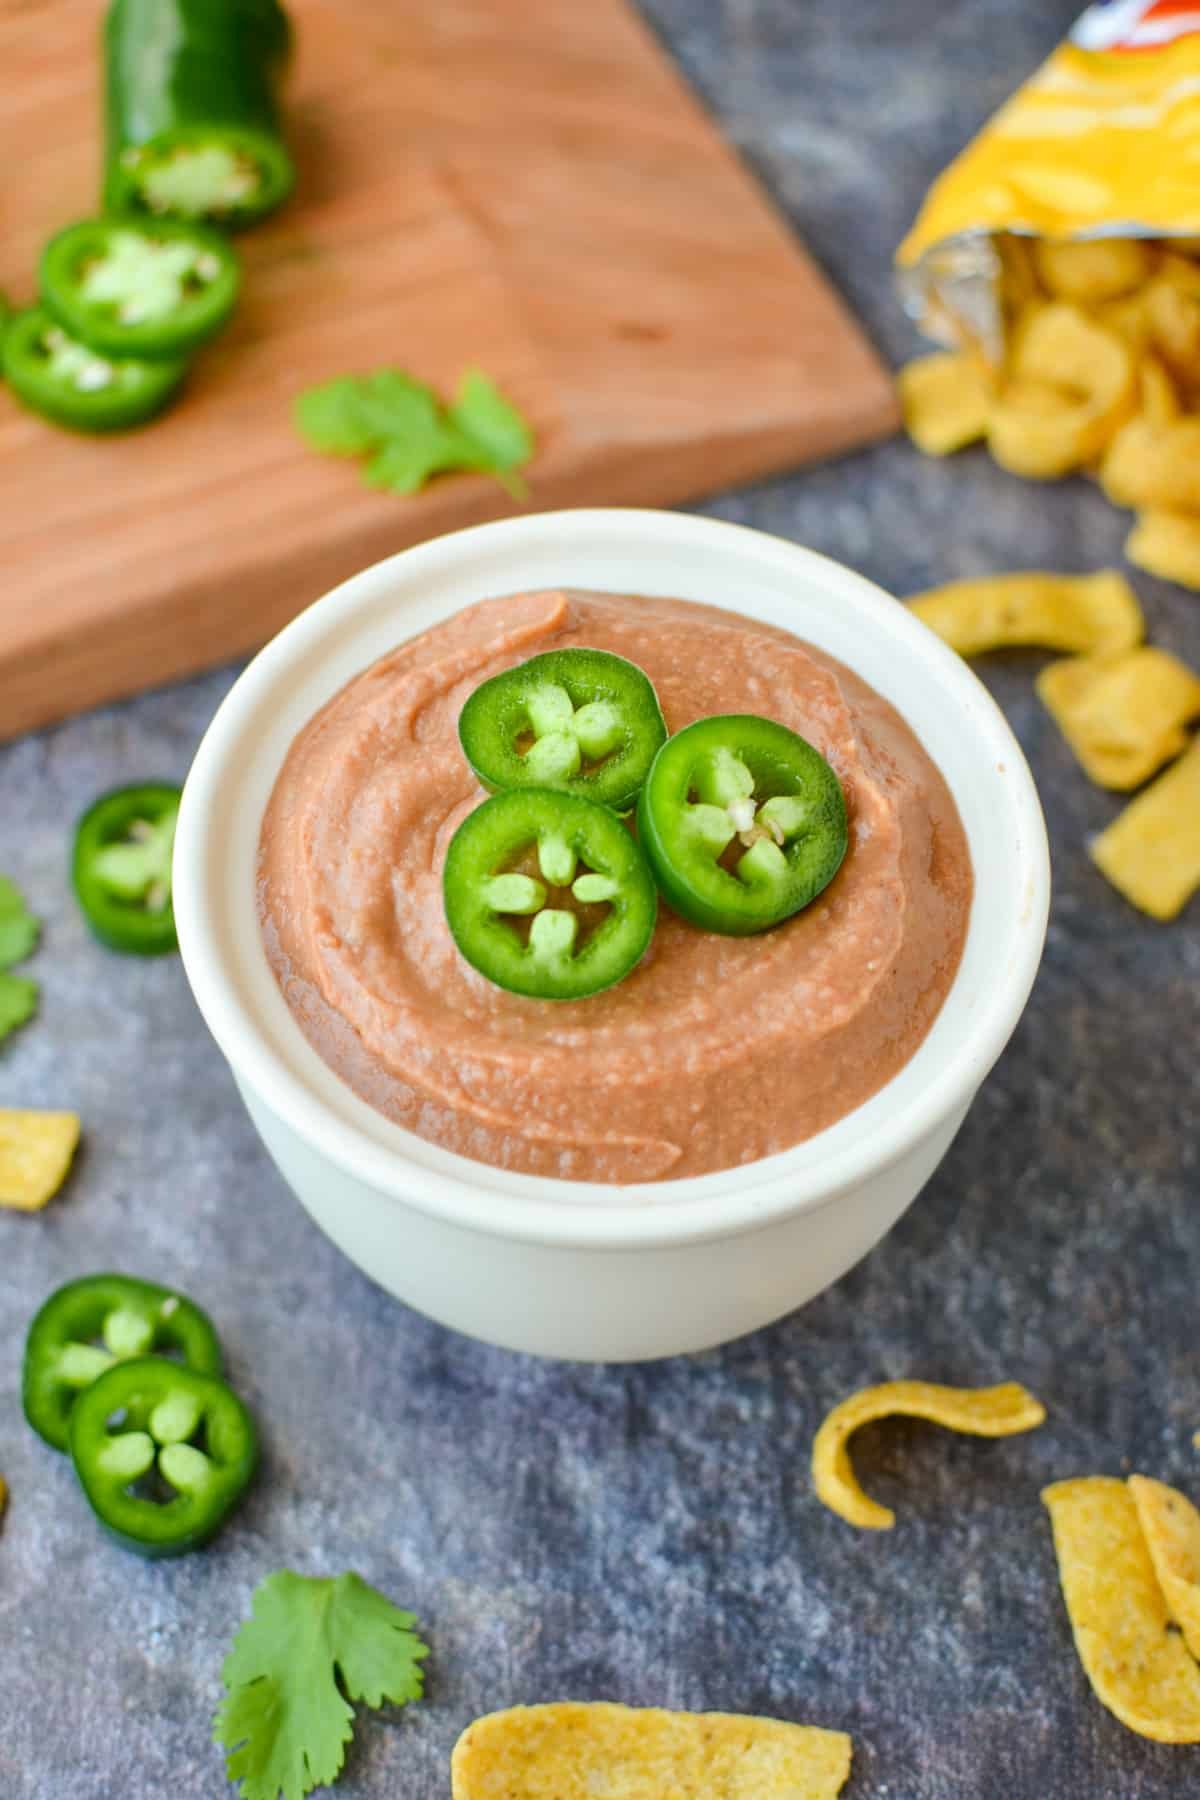 A small bowl of bean dip garnished with jalapeños.